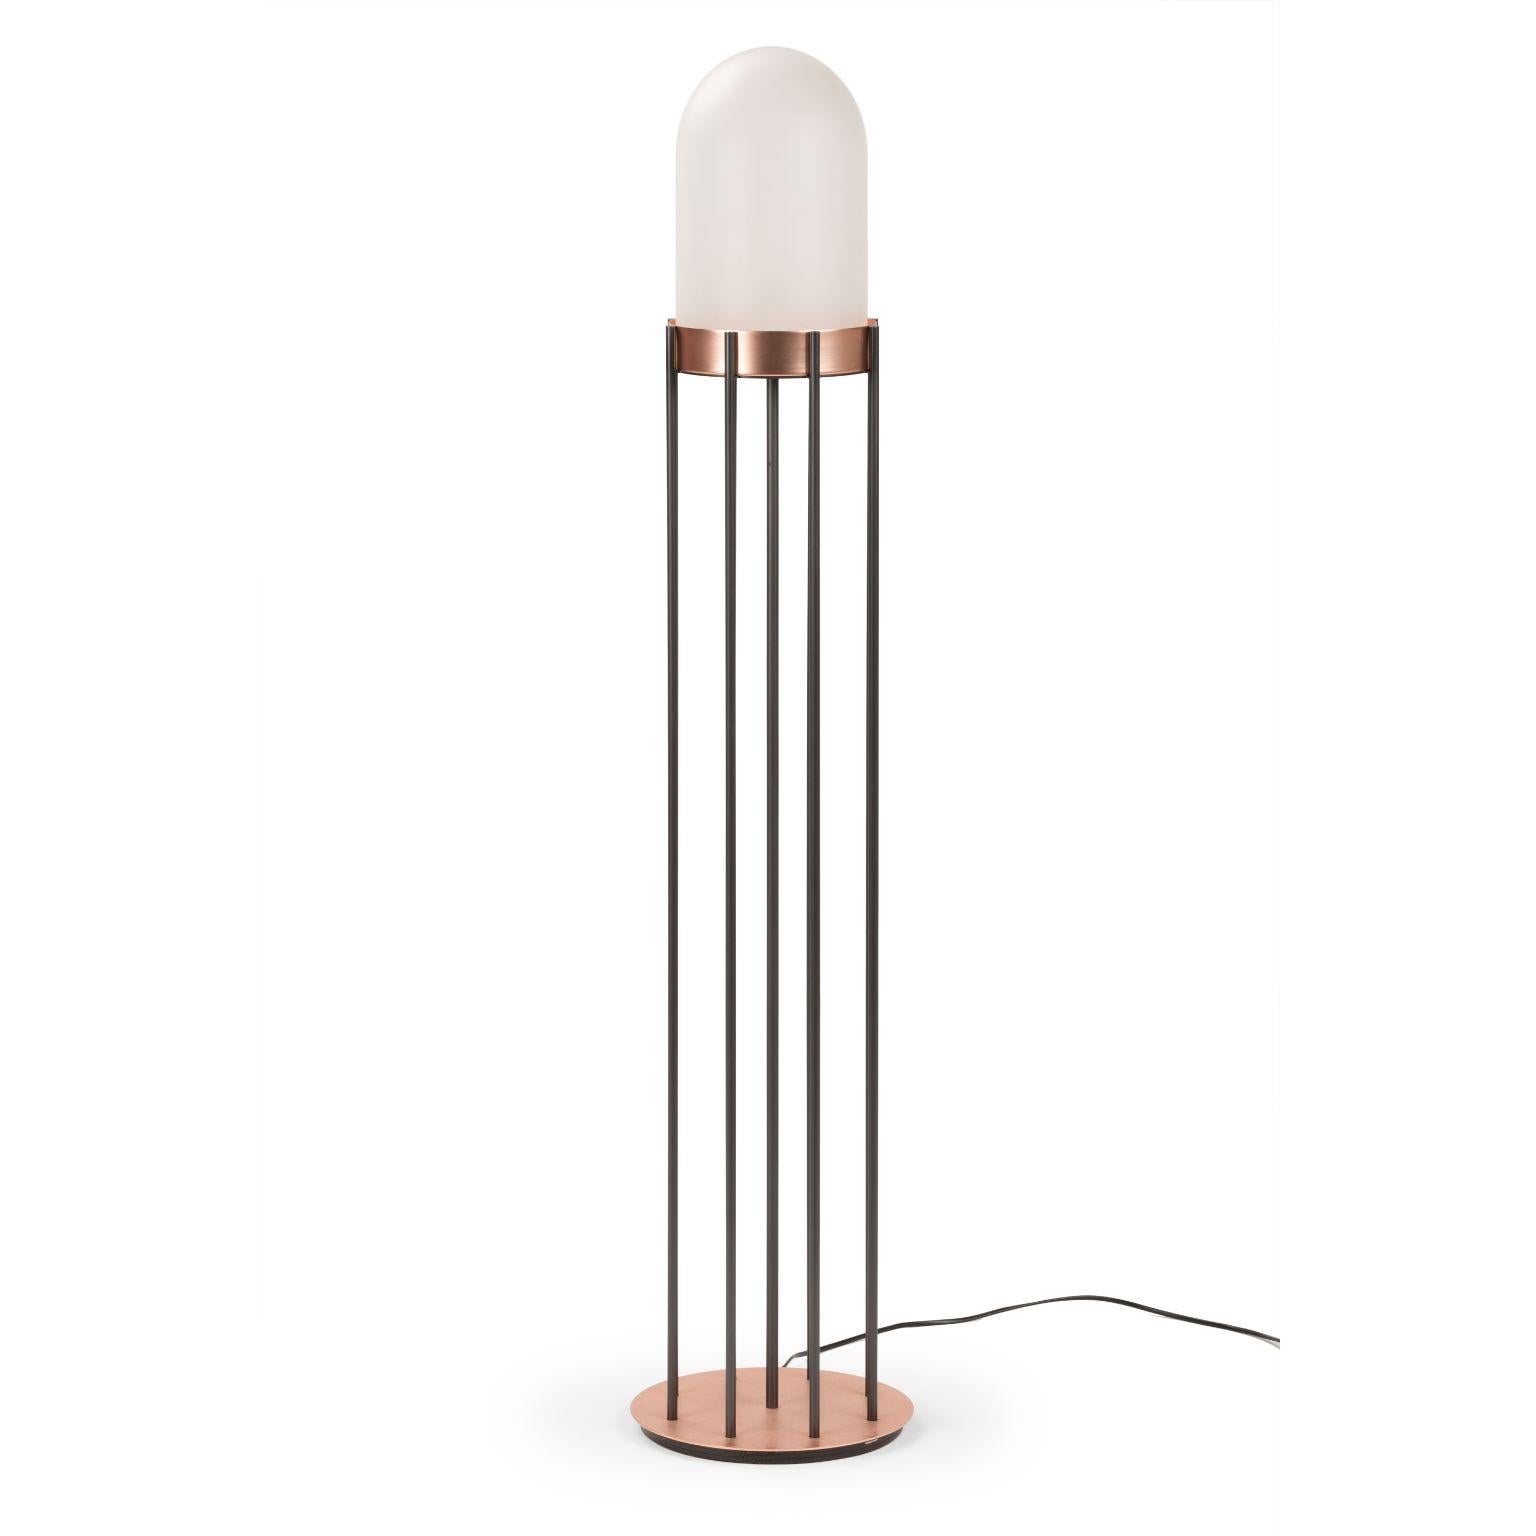 Dome floor lamp by Mingardo
Dimensions: D28x H135 cm 
Materials: Burnished iron structure with copper details, blown glass.
Weight: 15 kg

Also Available in different finishes.

All our lamps can be wired according to each country. If sold to